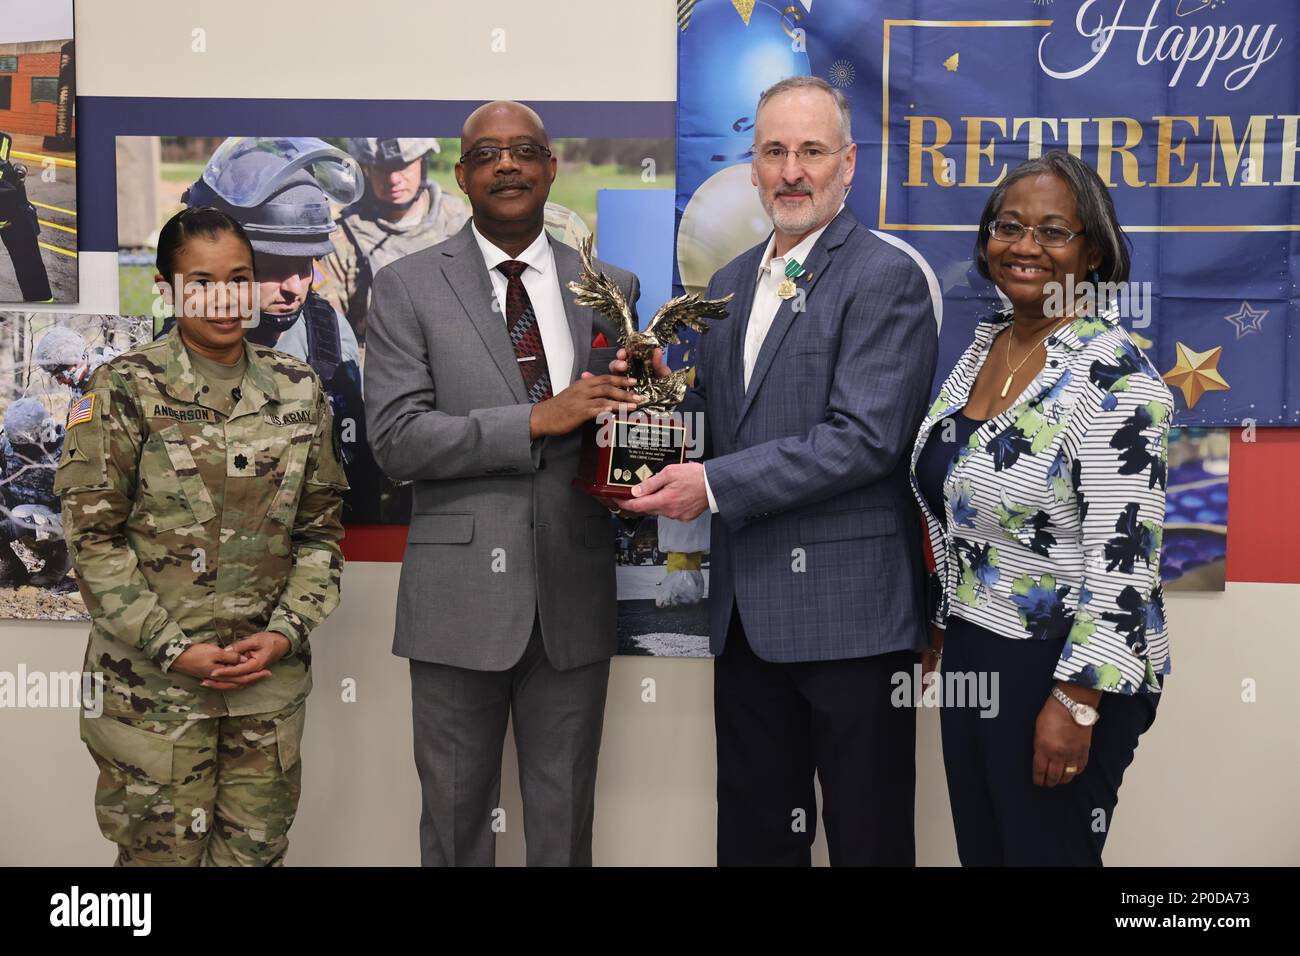 Lt. Col. Anne S. Anderson (left), the Assistant Chief of Staff for Communications (G6), and Monte Dashiell (second from left), the deputy G6, present a trophy to Michael R. Williams and his wife Elaine Williams.  Michael Williams retired after 41 years of uniformed and civil service on Aberdeen Proving Ground, Maryland, Feb. 22.  U.S. Army photo by Angel D. Martinez-Navedo. Stock Photo